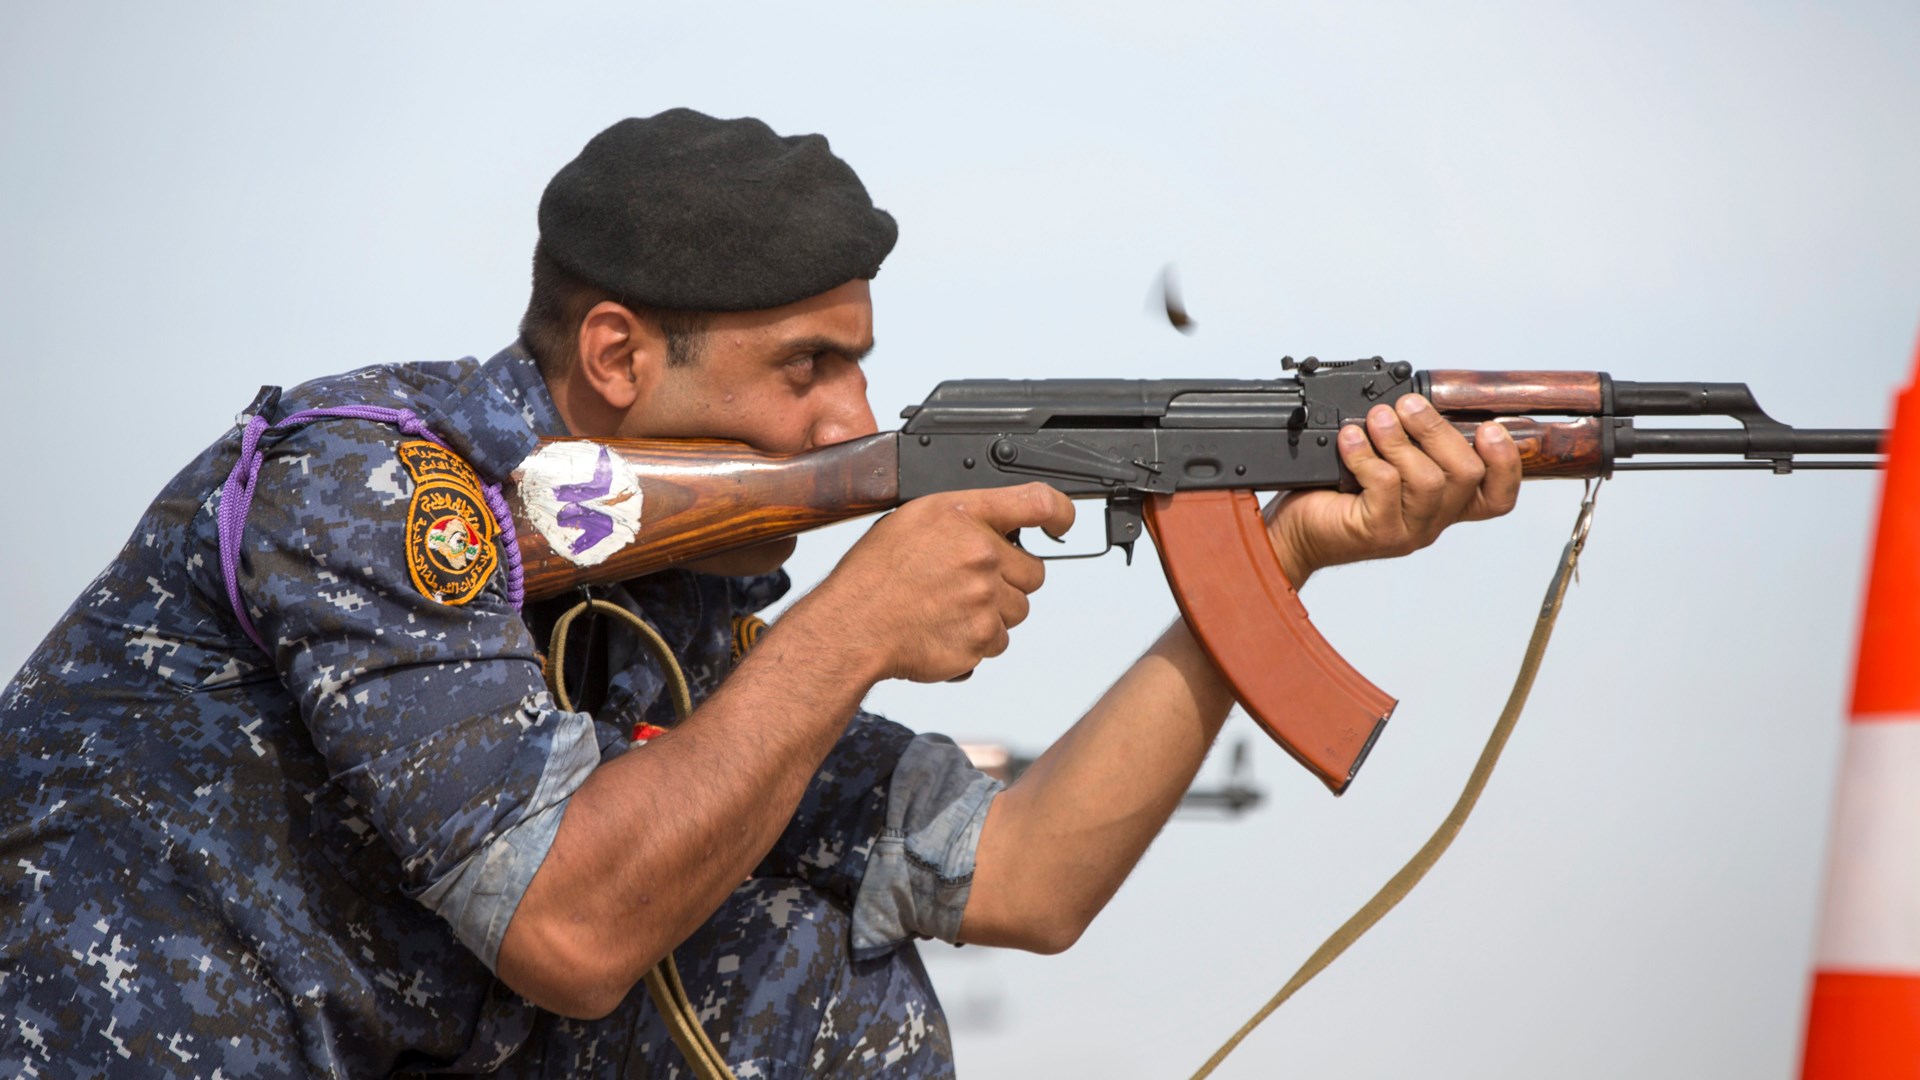 A member of the Iraqi security forces fires an AKM during short-range marksmanship training led by Spanish Guardia Civil at the Besmaya Range Complex, Iraq, on May 23, 2017. (U.S. Army photo by Cpl. Tracy McKithern)